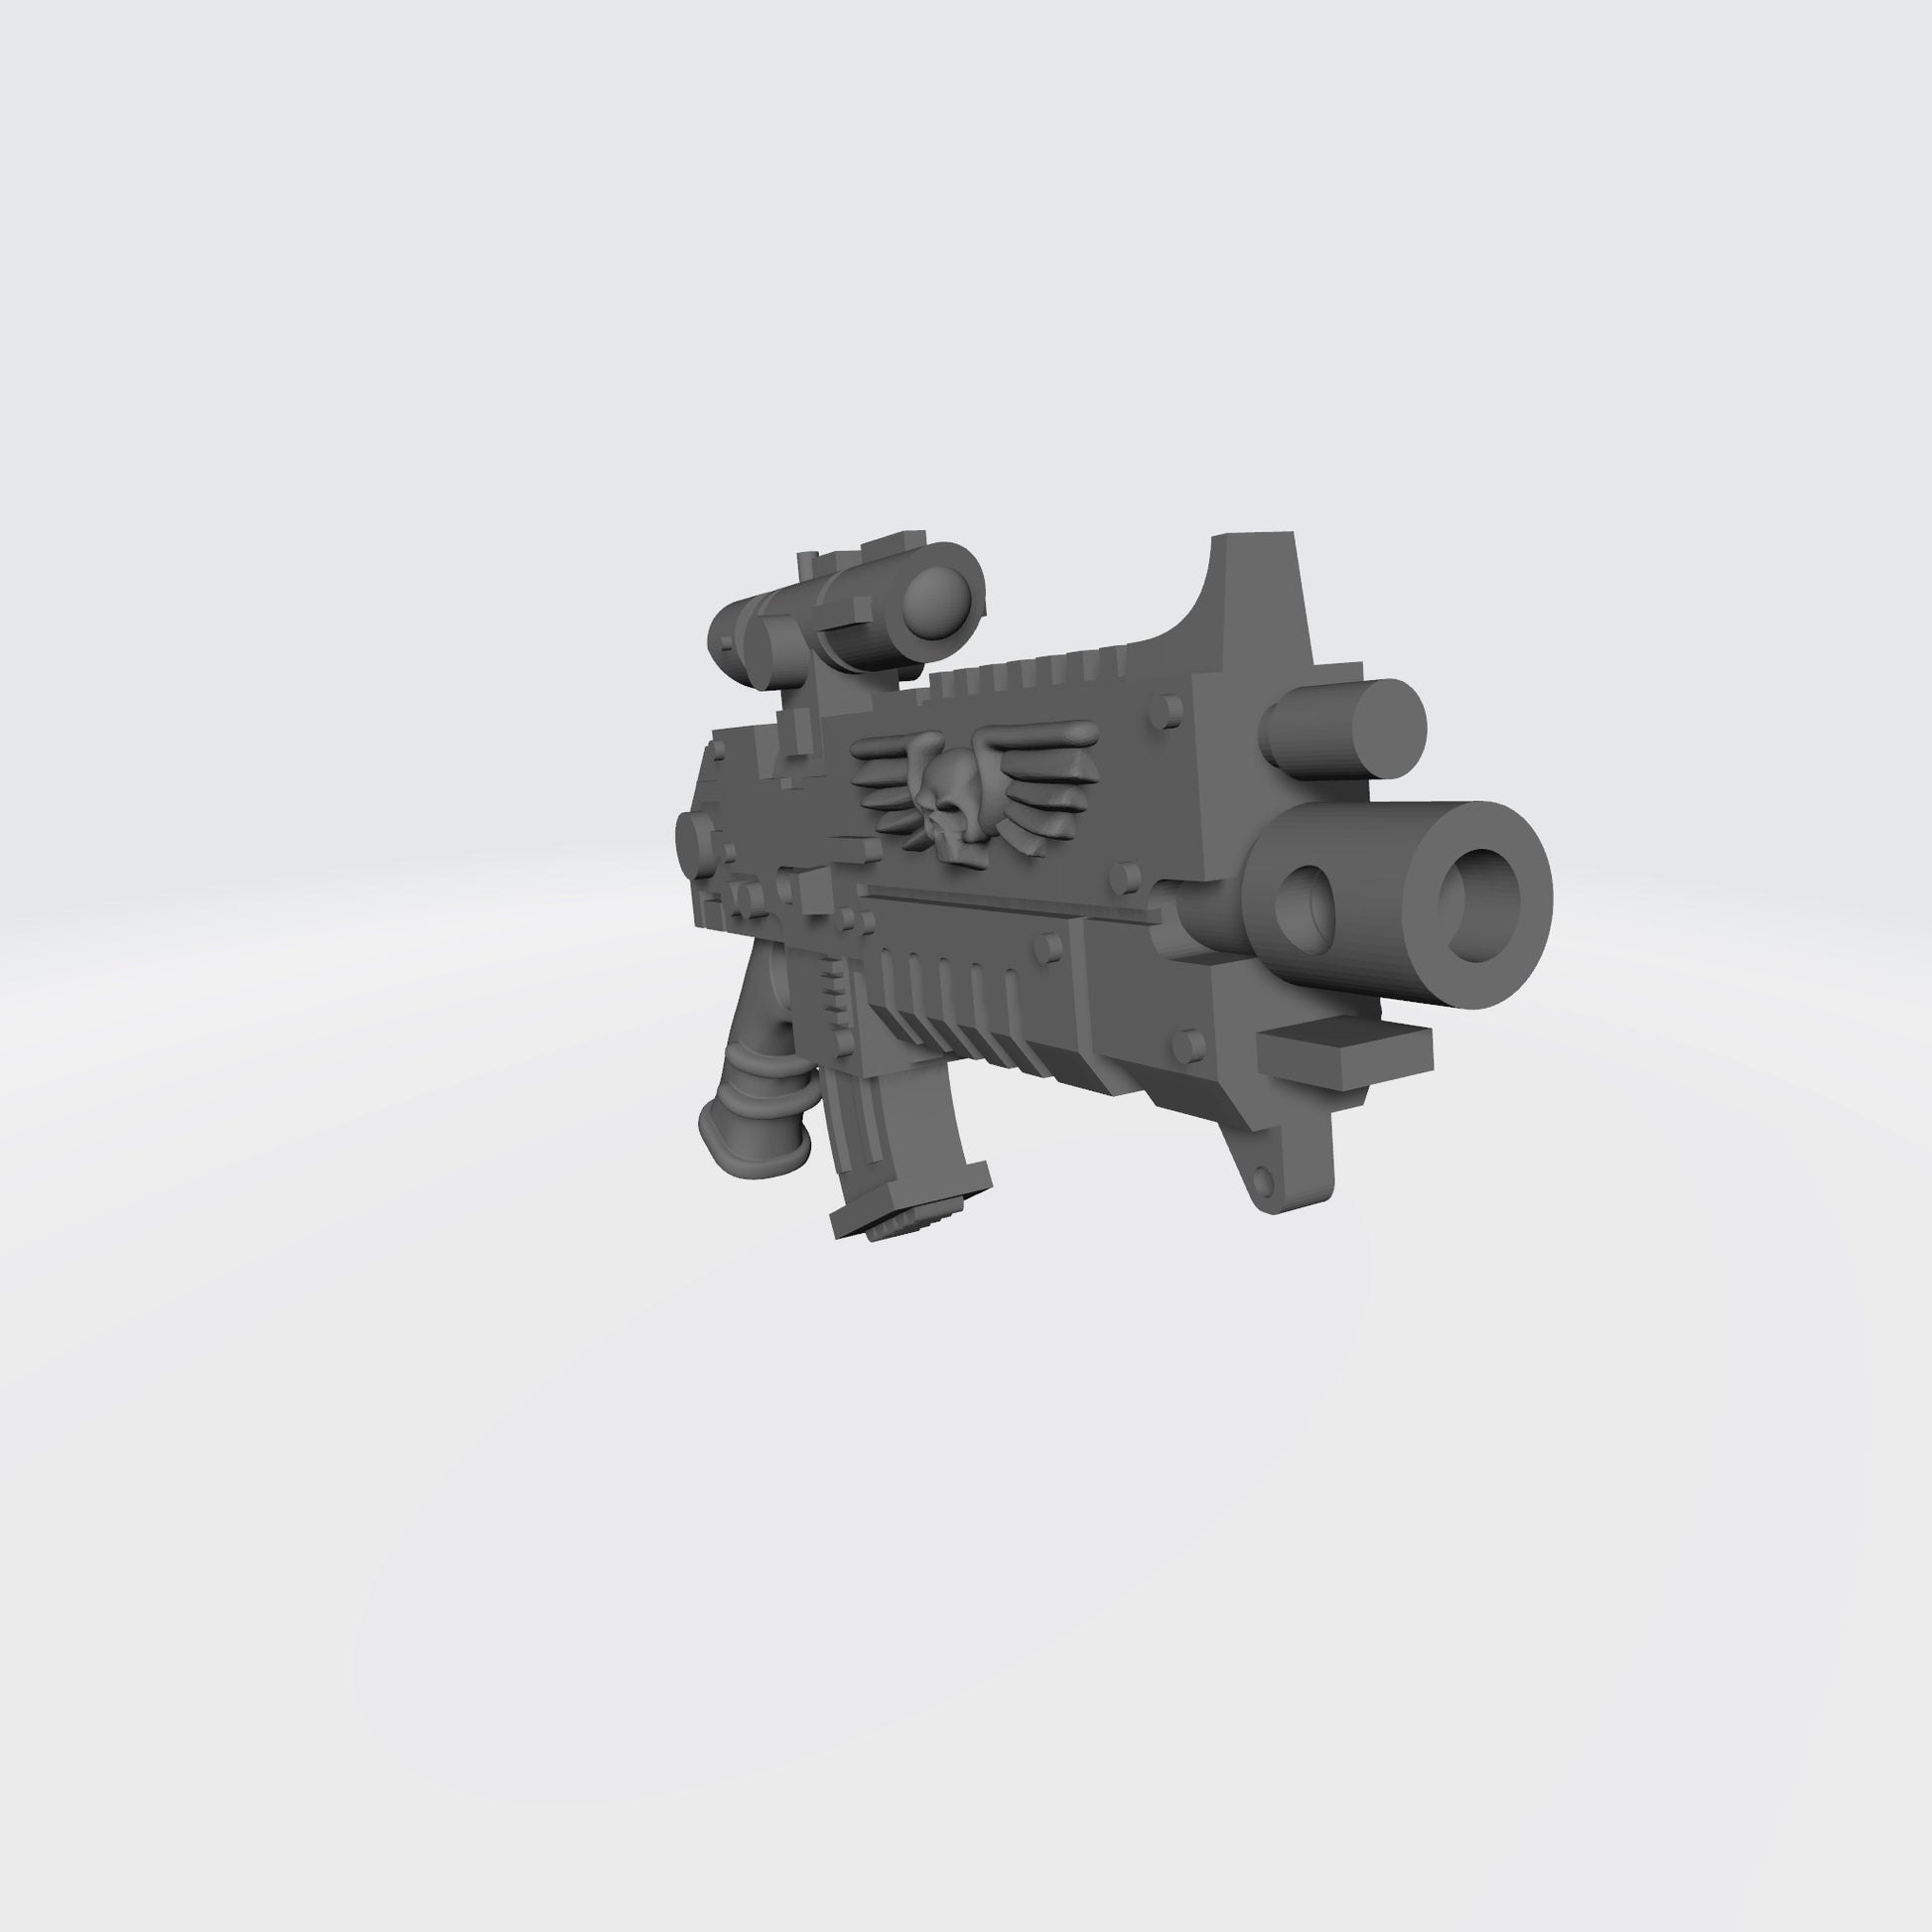 Bolt Rifle with Scope compatible with JoyToy Space Marine Action Figures